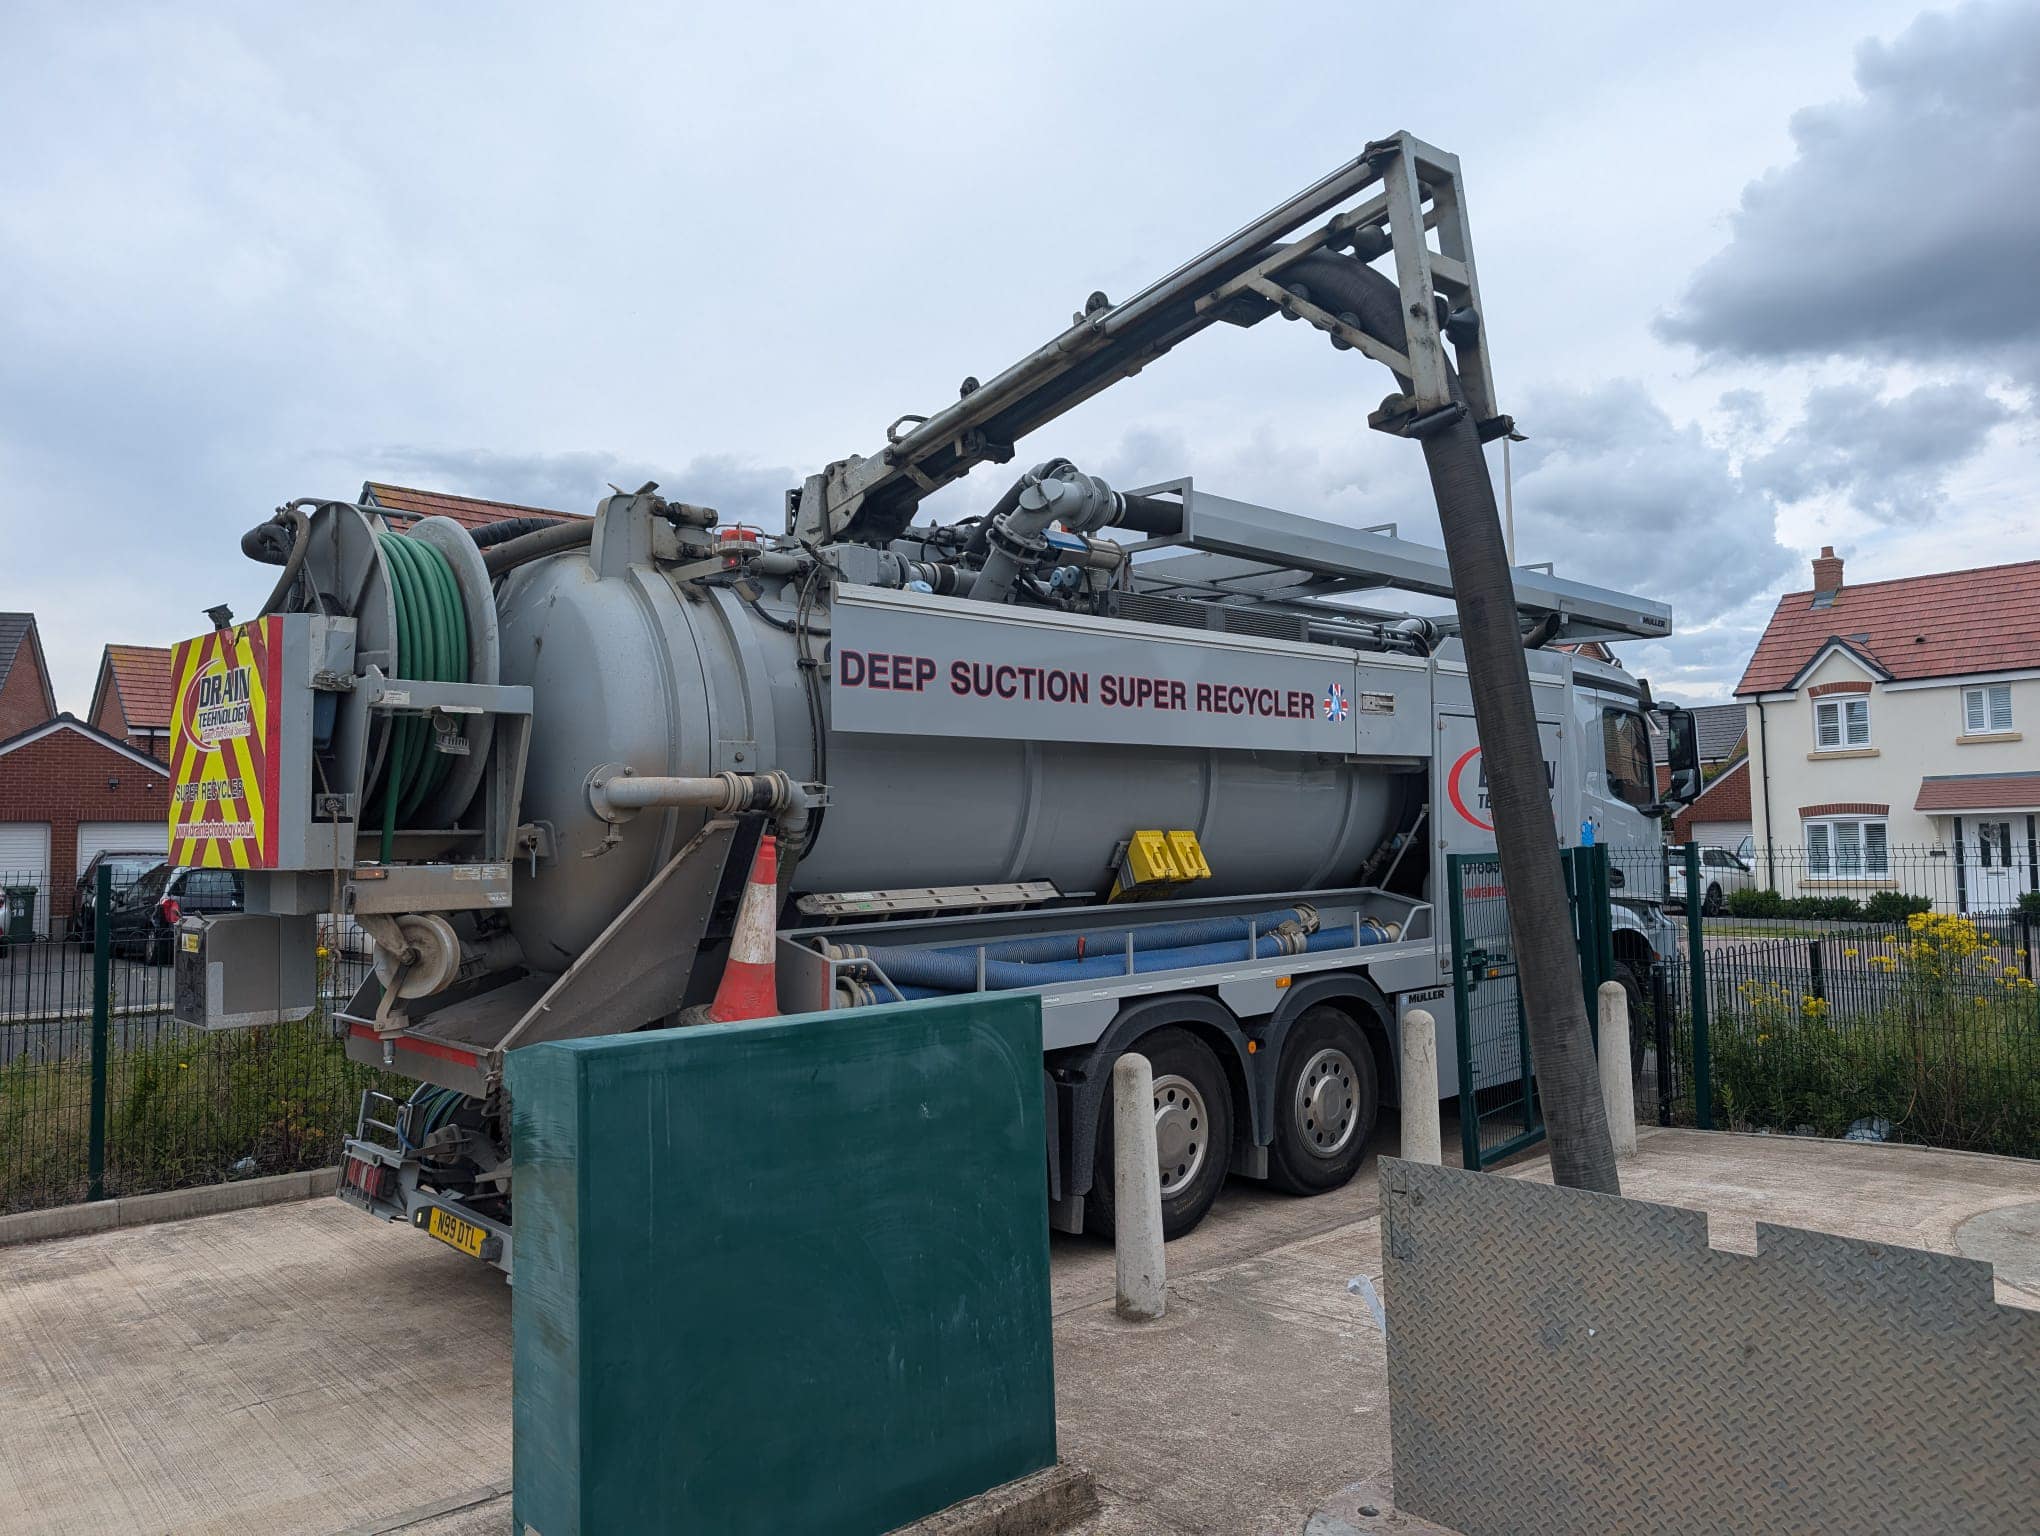 Our deep suction super recycler “Noo Noo”is out today and continuing on into the night over pumping a failed pump station on a housing estate.